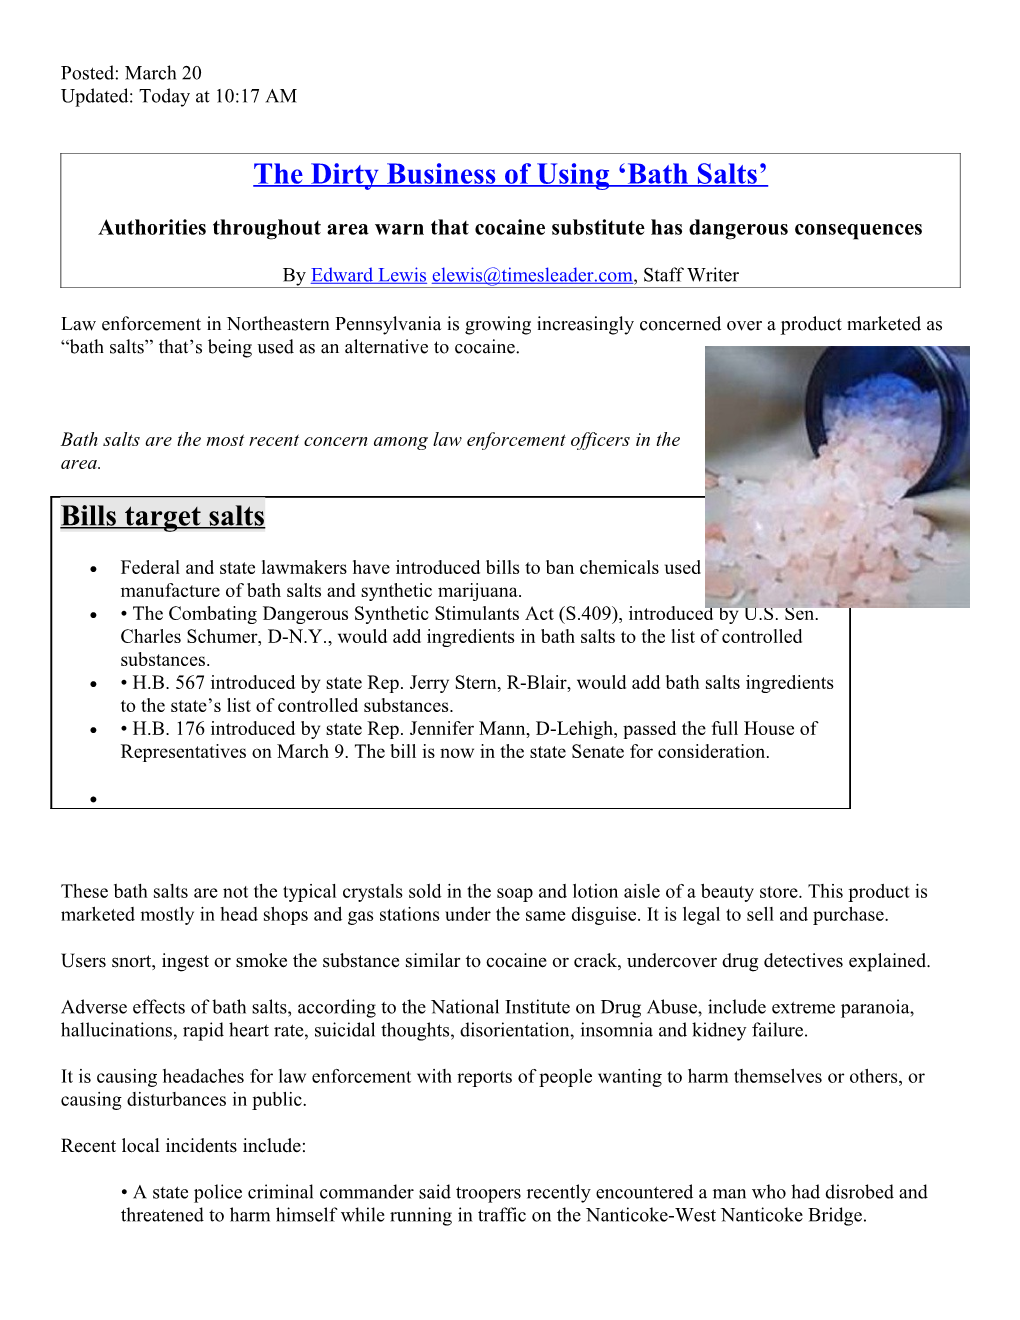 The Dirty Business of Using Bath Salts